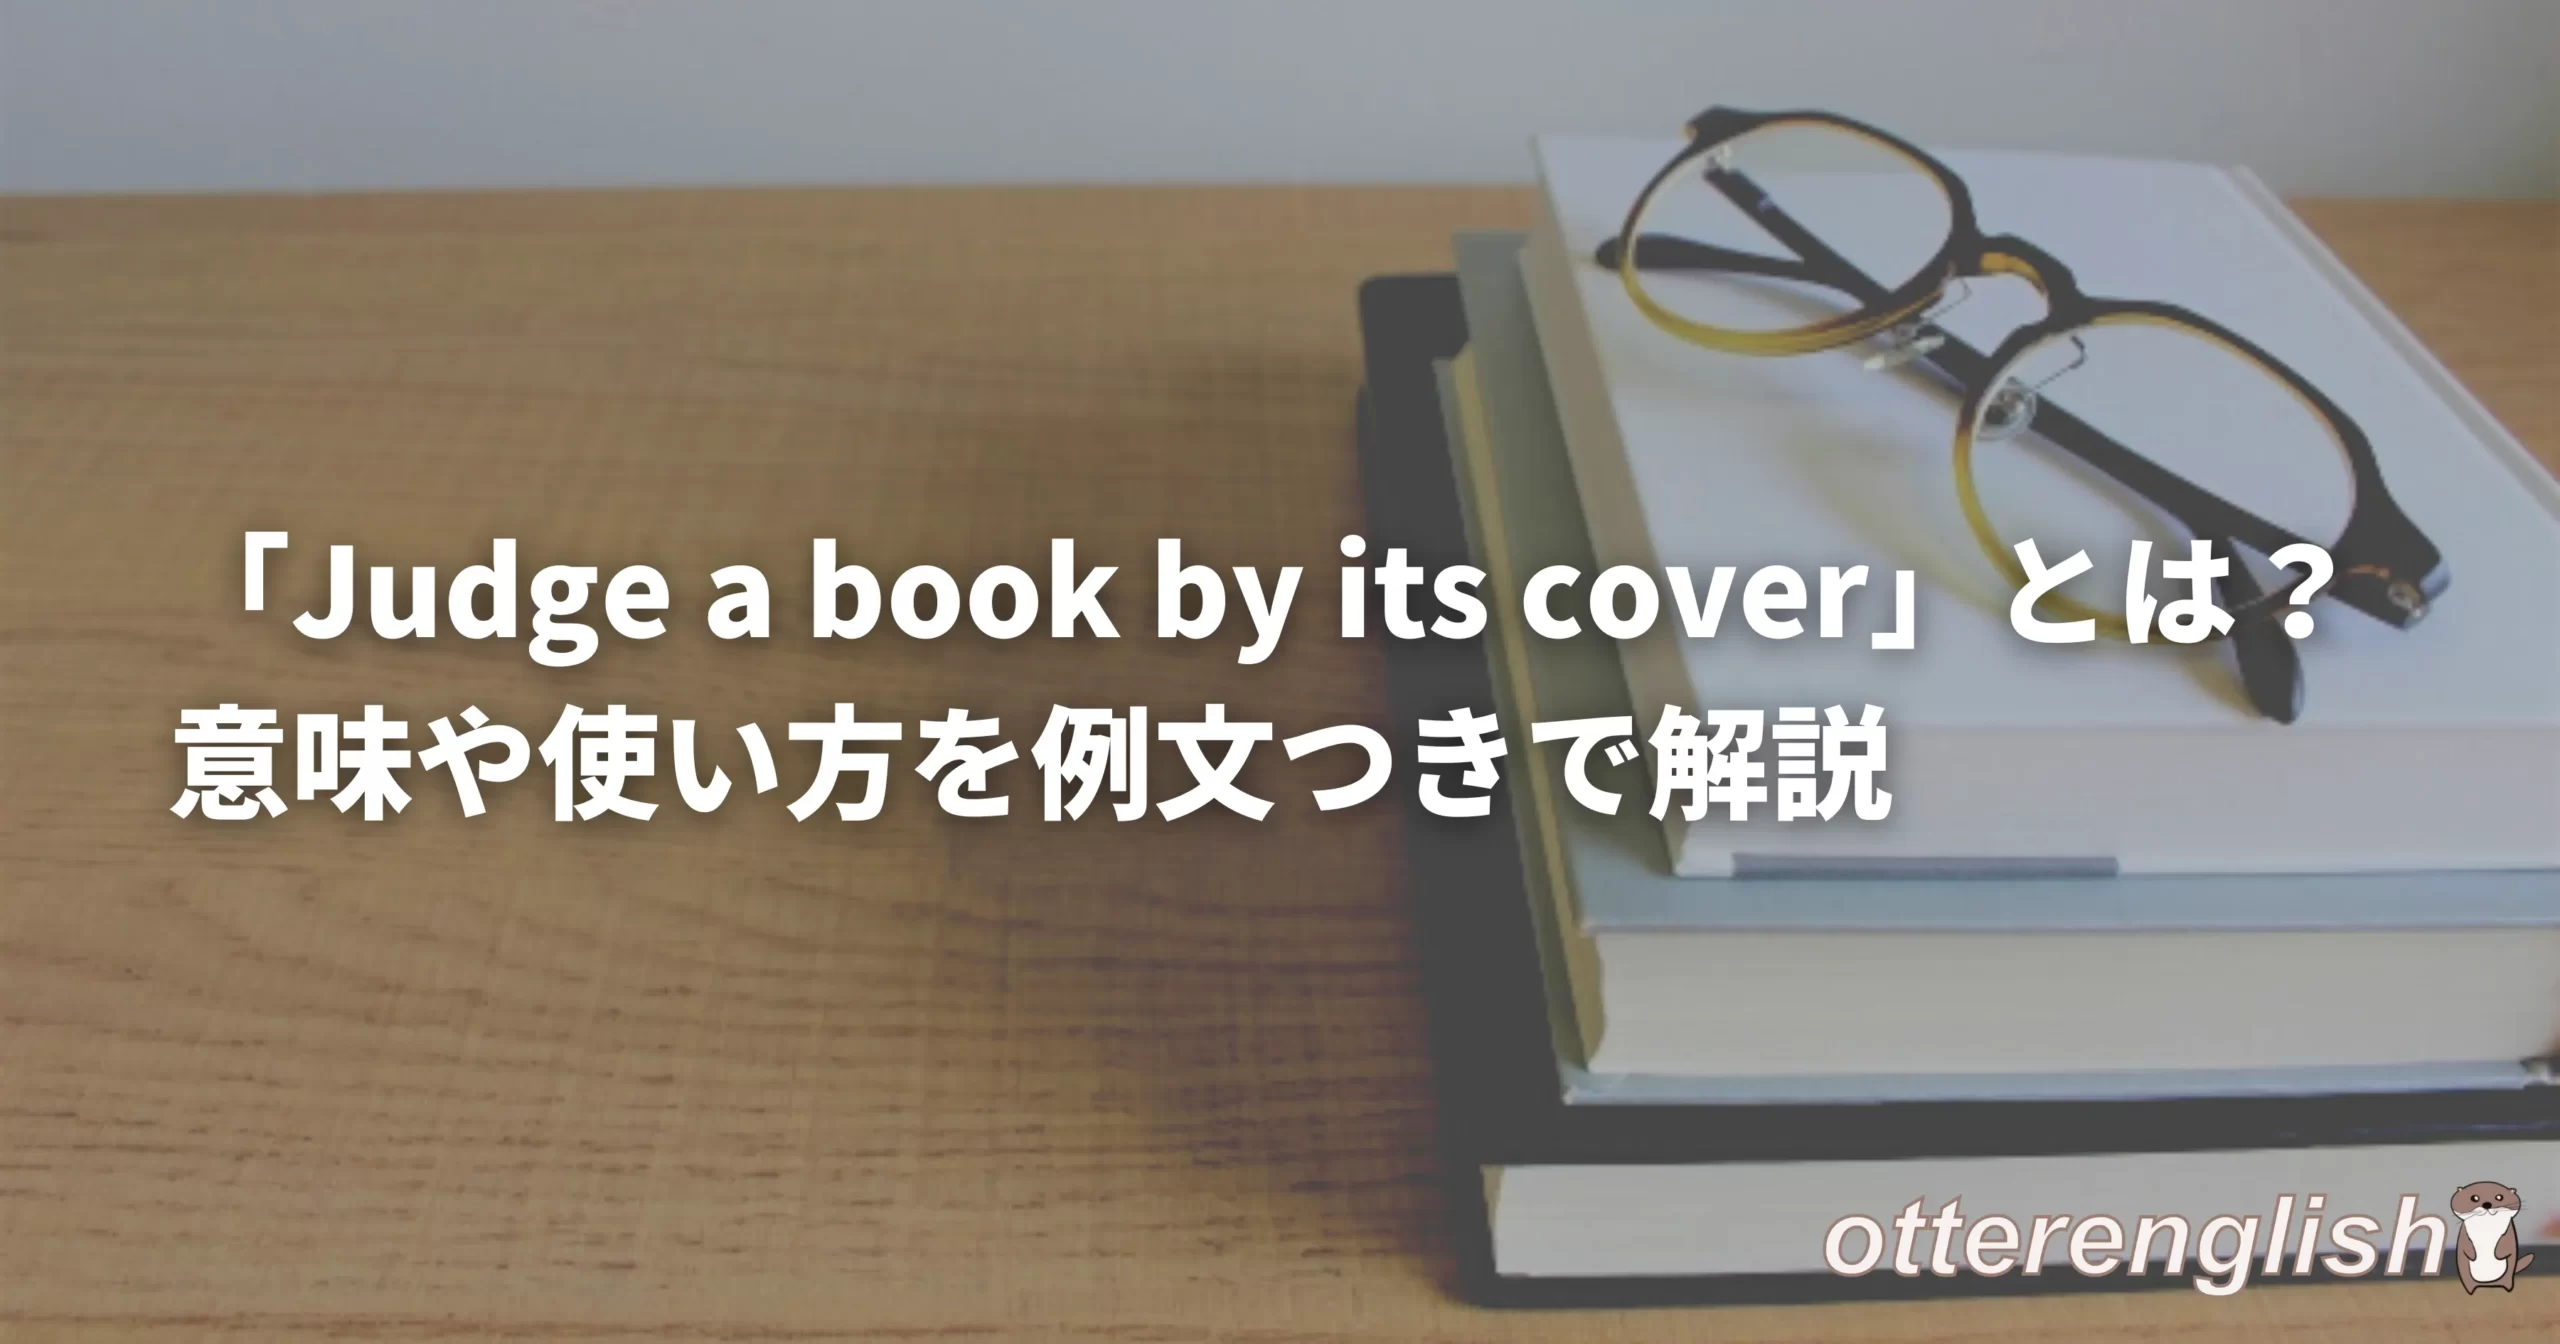 judge a book by its coverを表した本のカバーの画像